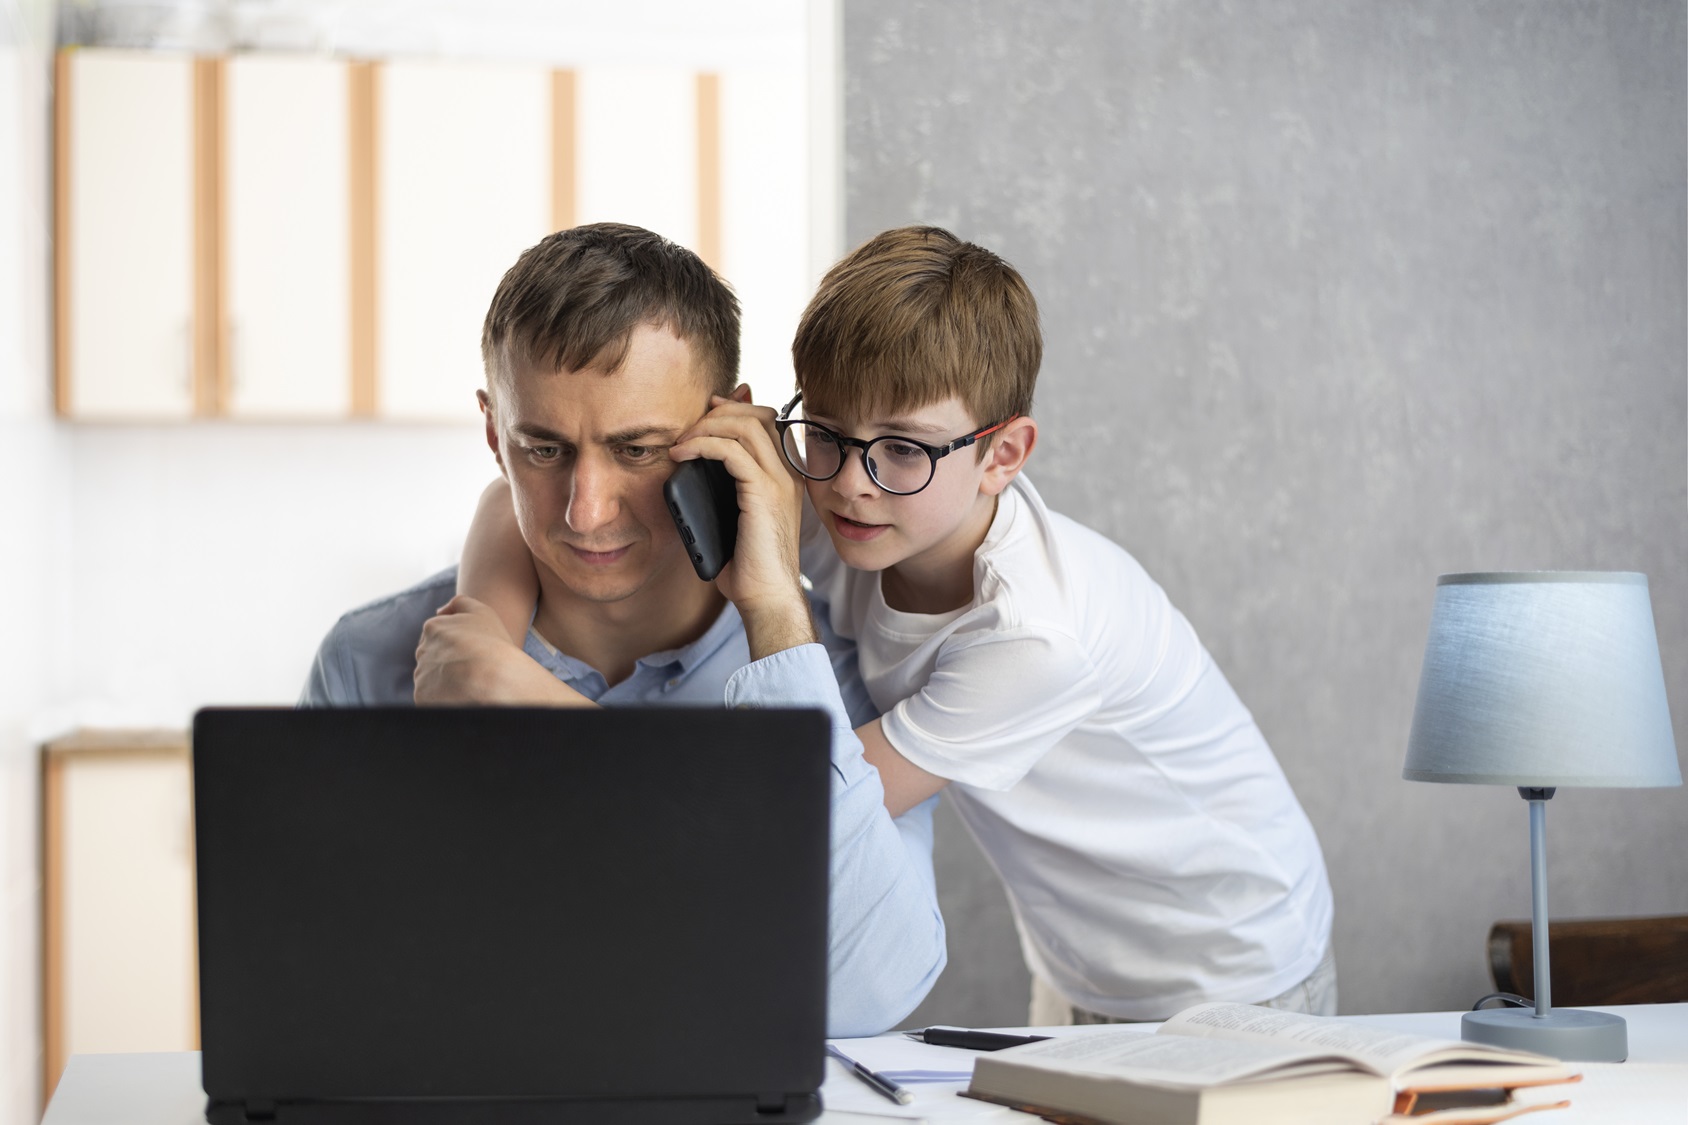 son-distracts-his-father-from-work-looking-into-his-laptop-man-freelancer-talks-on-the-phone-and-works-at-the-computer-at-home-with-child